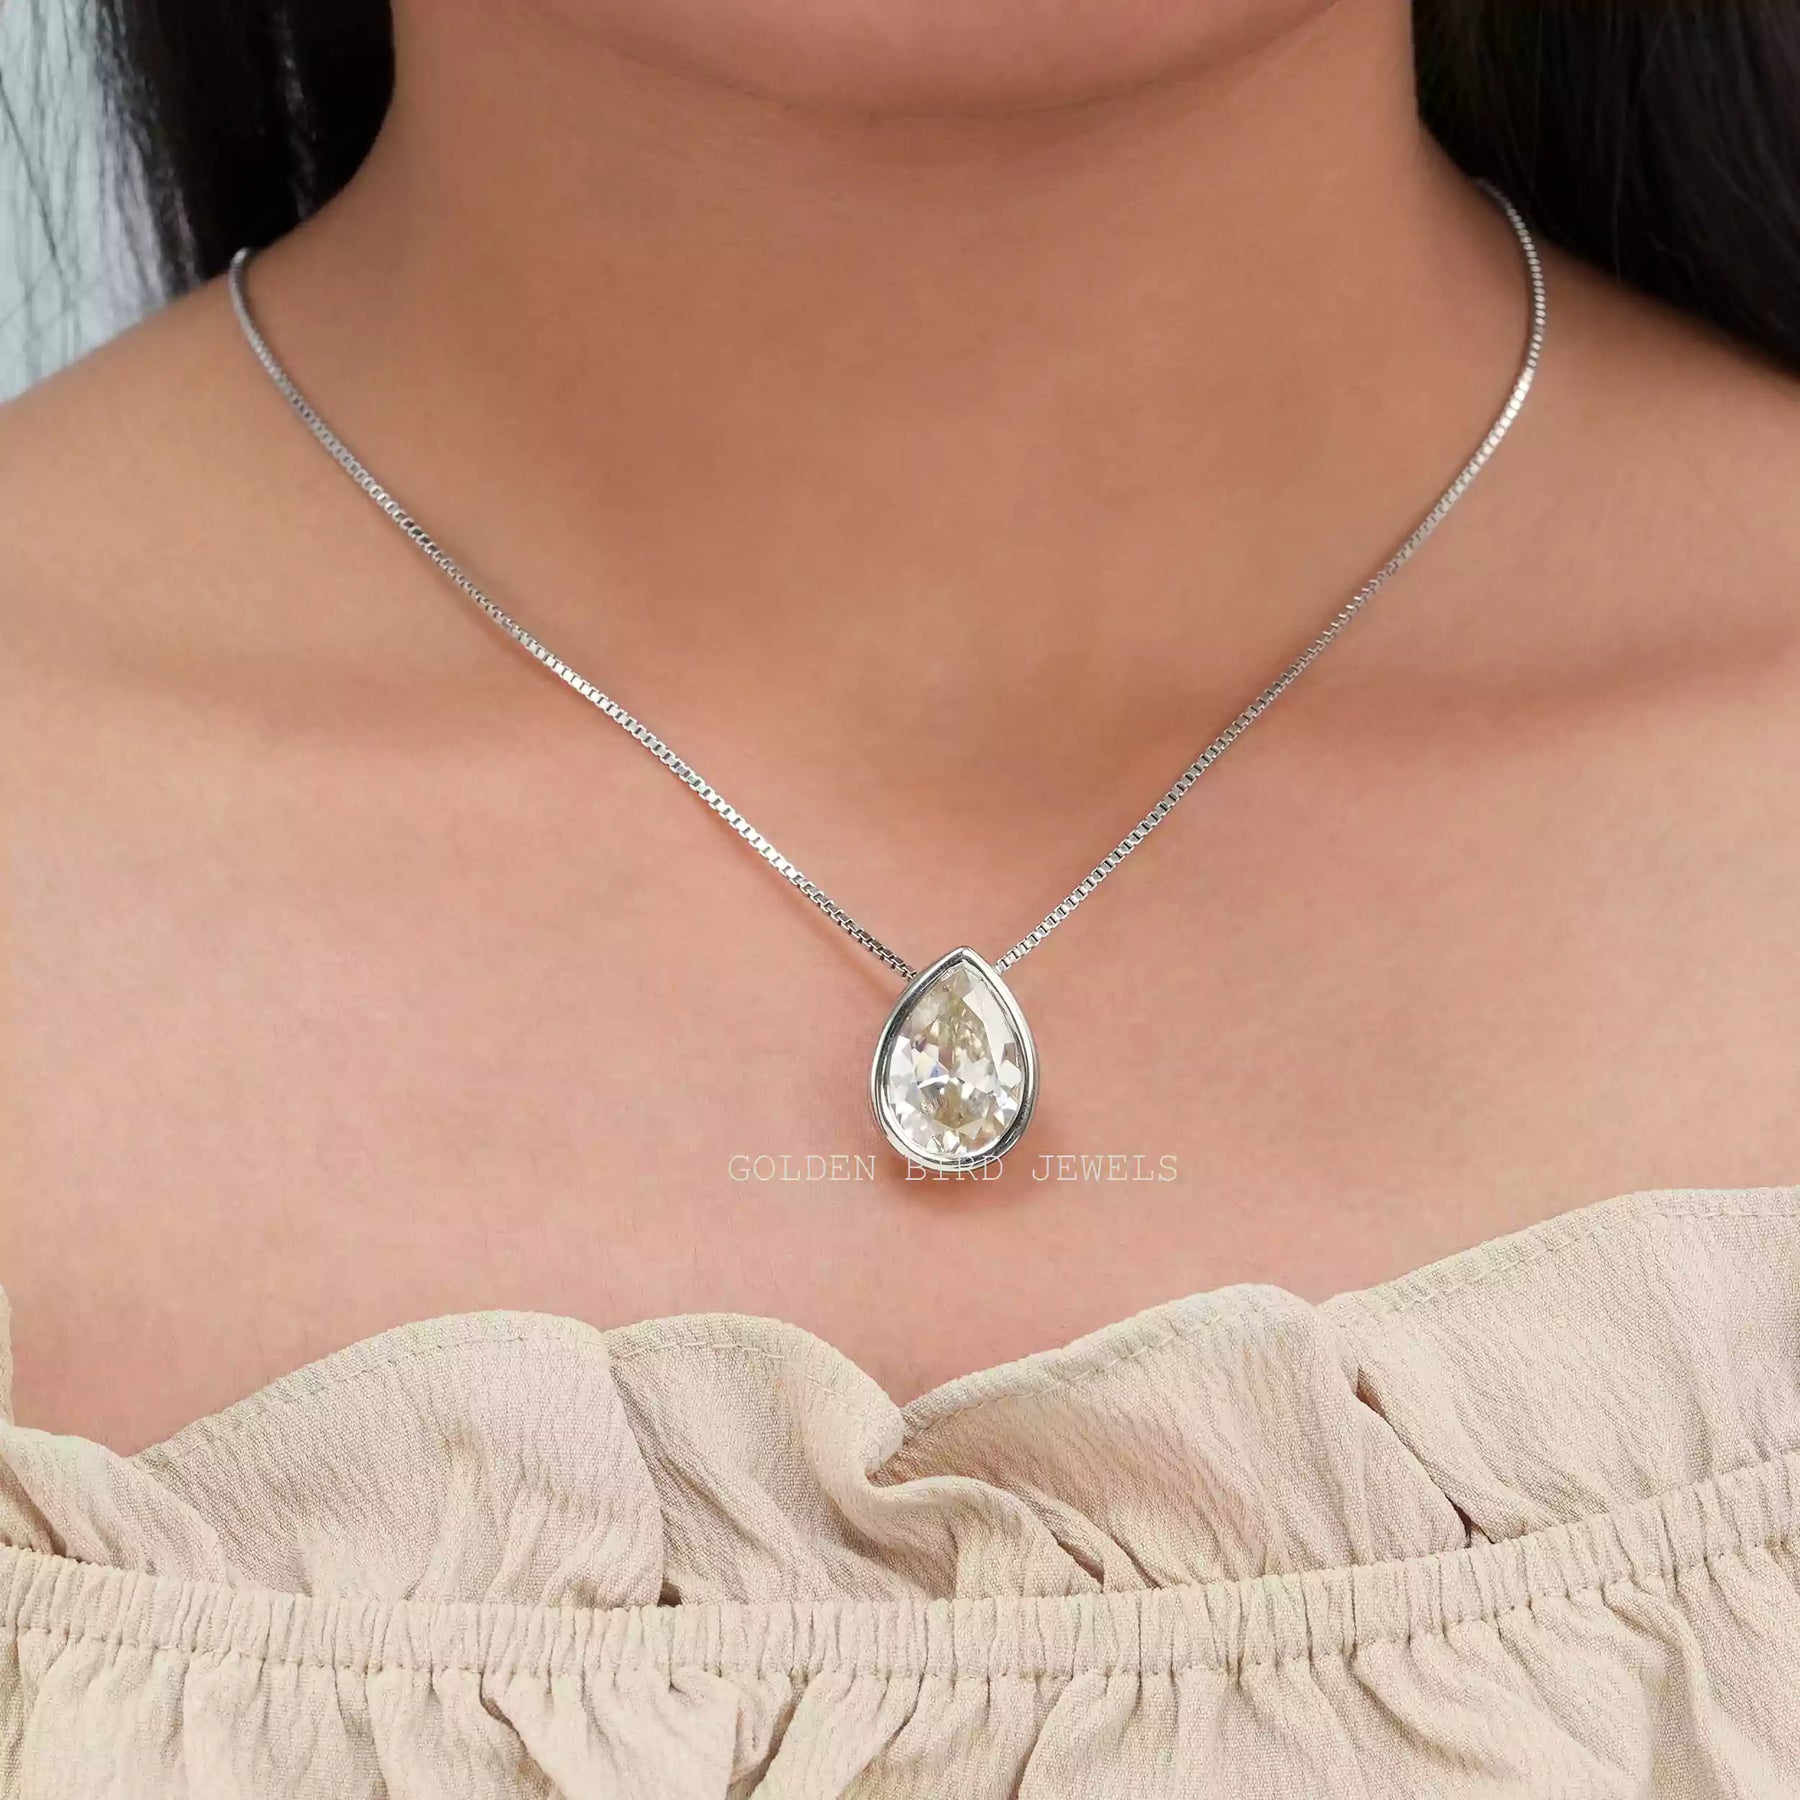 [In neck front view of bezel set pear cut moissanite pendant crafted with 14k white gold]-[Golden Bird Jewels]